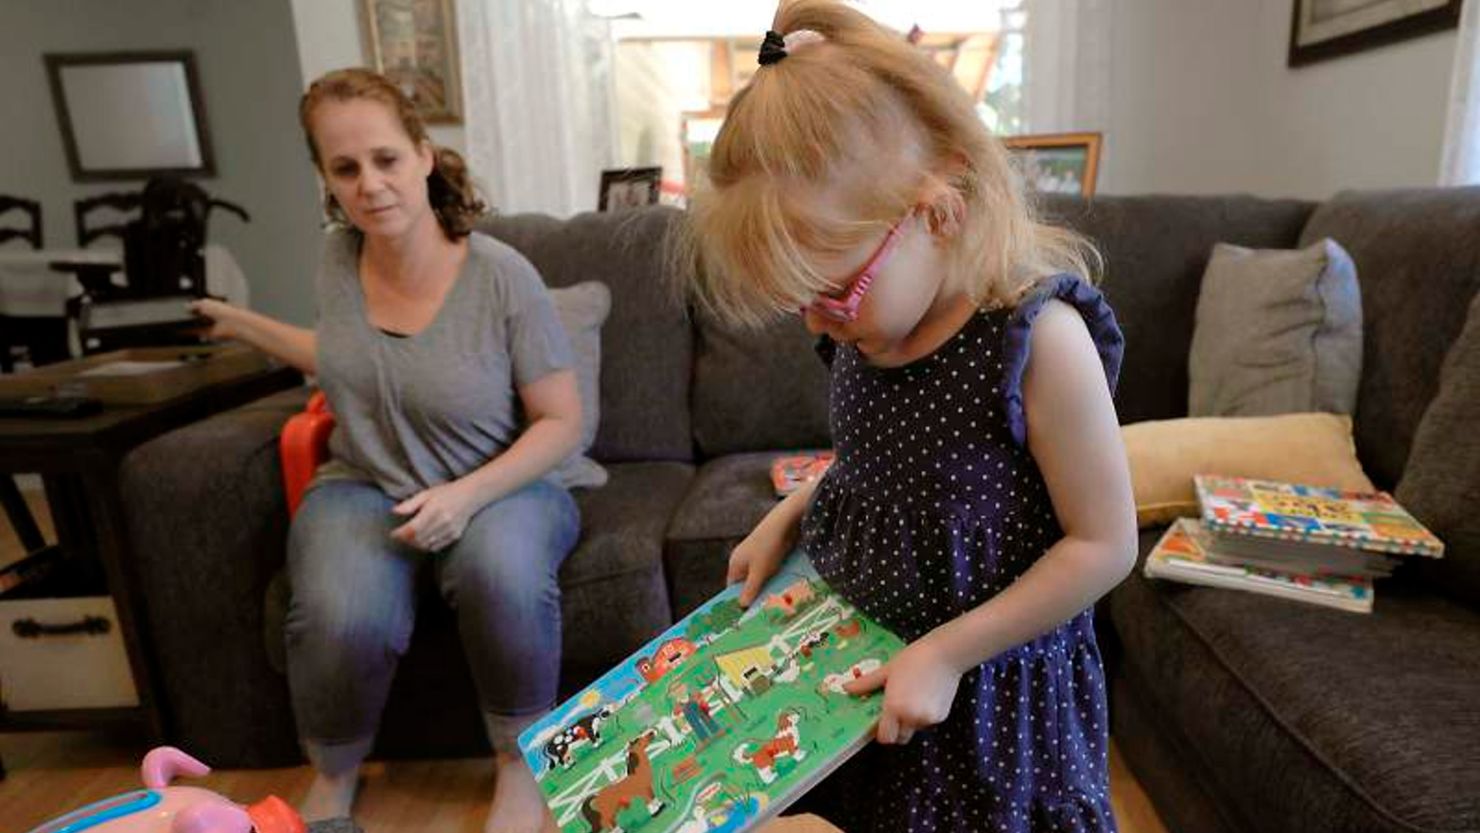 California kindergartner Brooke Adams will be allowed to attend school with her cannabis-based drug to treat epilepsy.